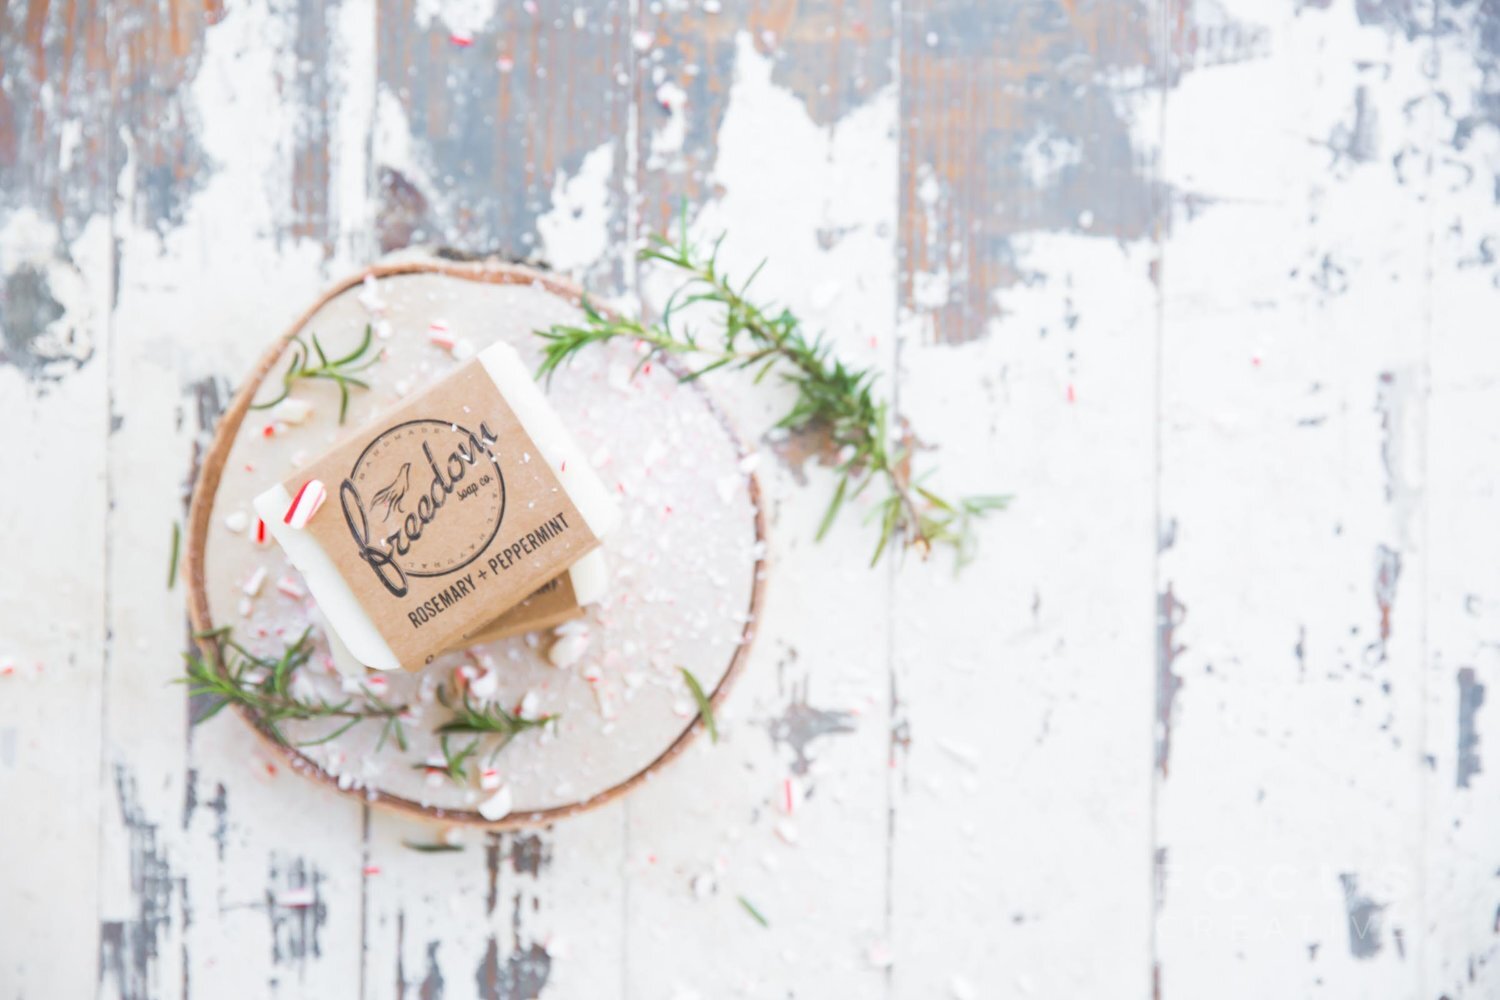 Freedom Soap Co.’s Rosemary + Peppermint soap is a top seller during the holiday season.